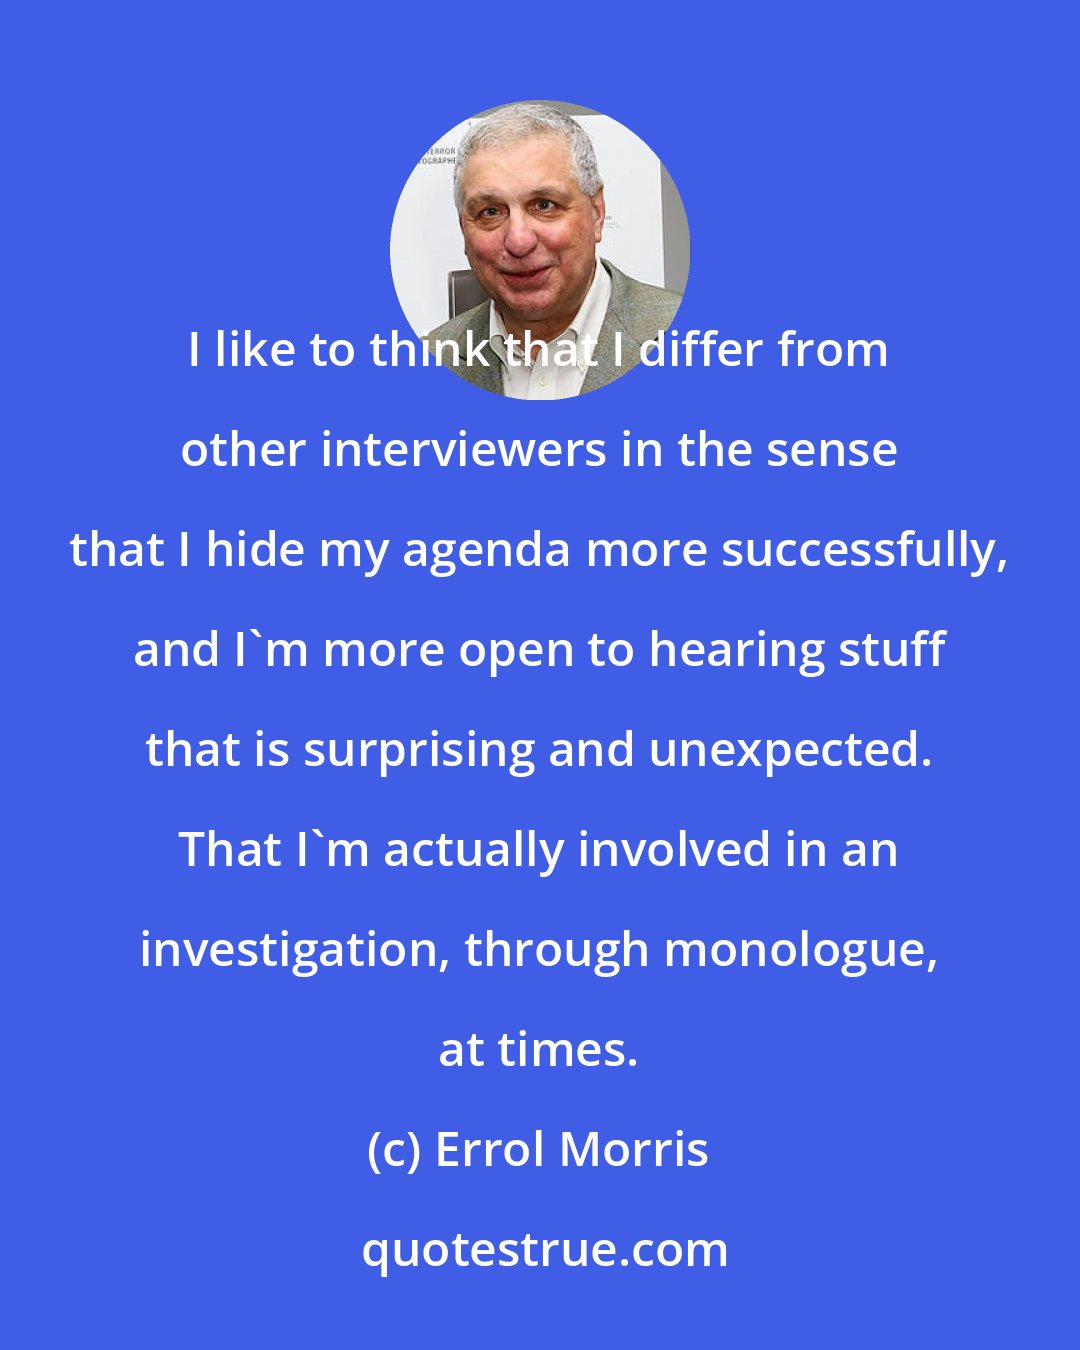 Errol Morris: I like to think that I differ from other interviewers in the sense that I hide my agenda more successfully, and I'm more open to hearing stuff that is surprising and unexpected. That I'm actually involved in an investigation, through monologue, at times.